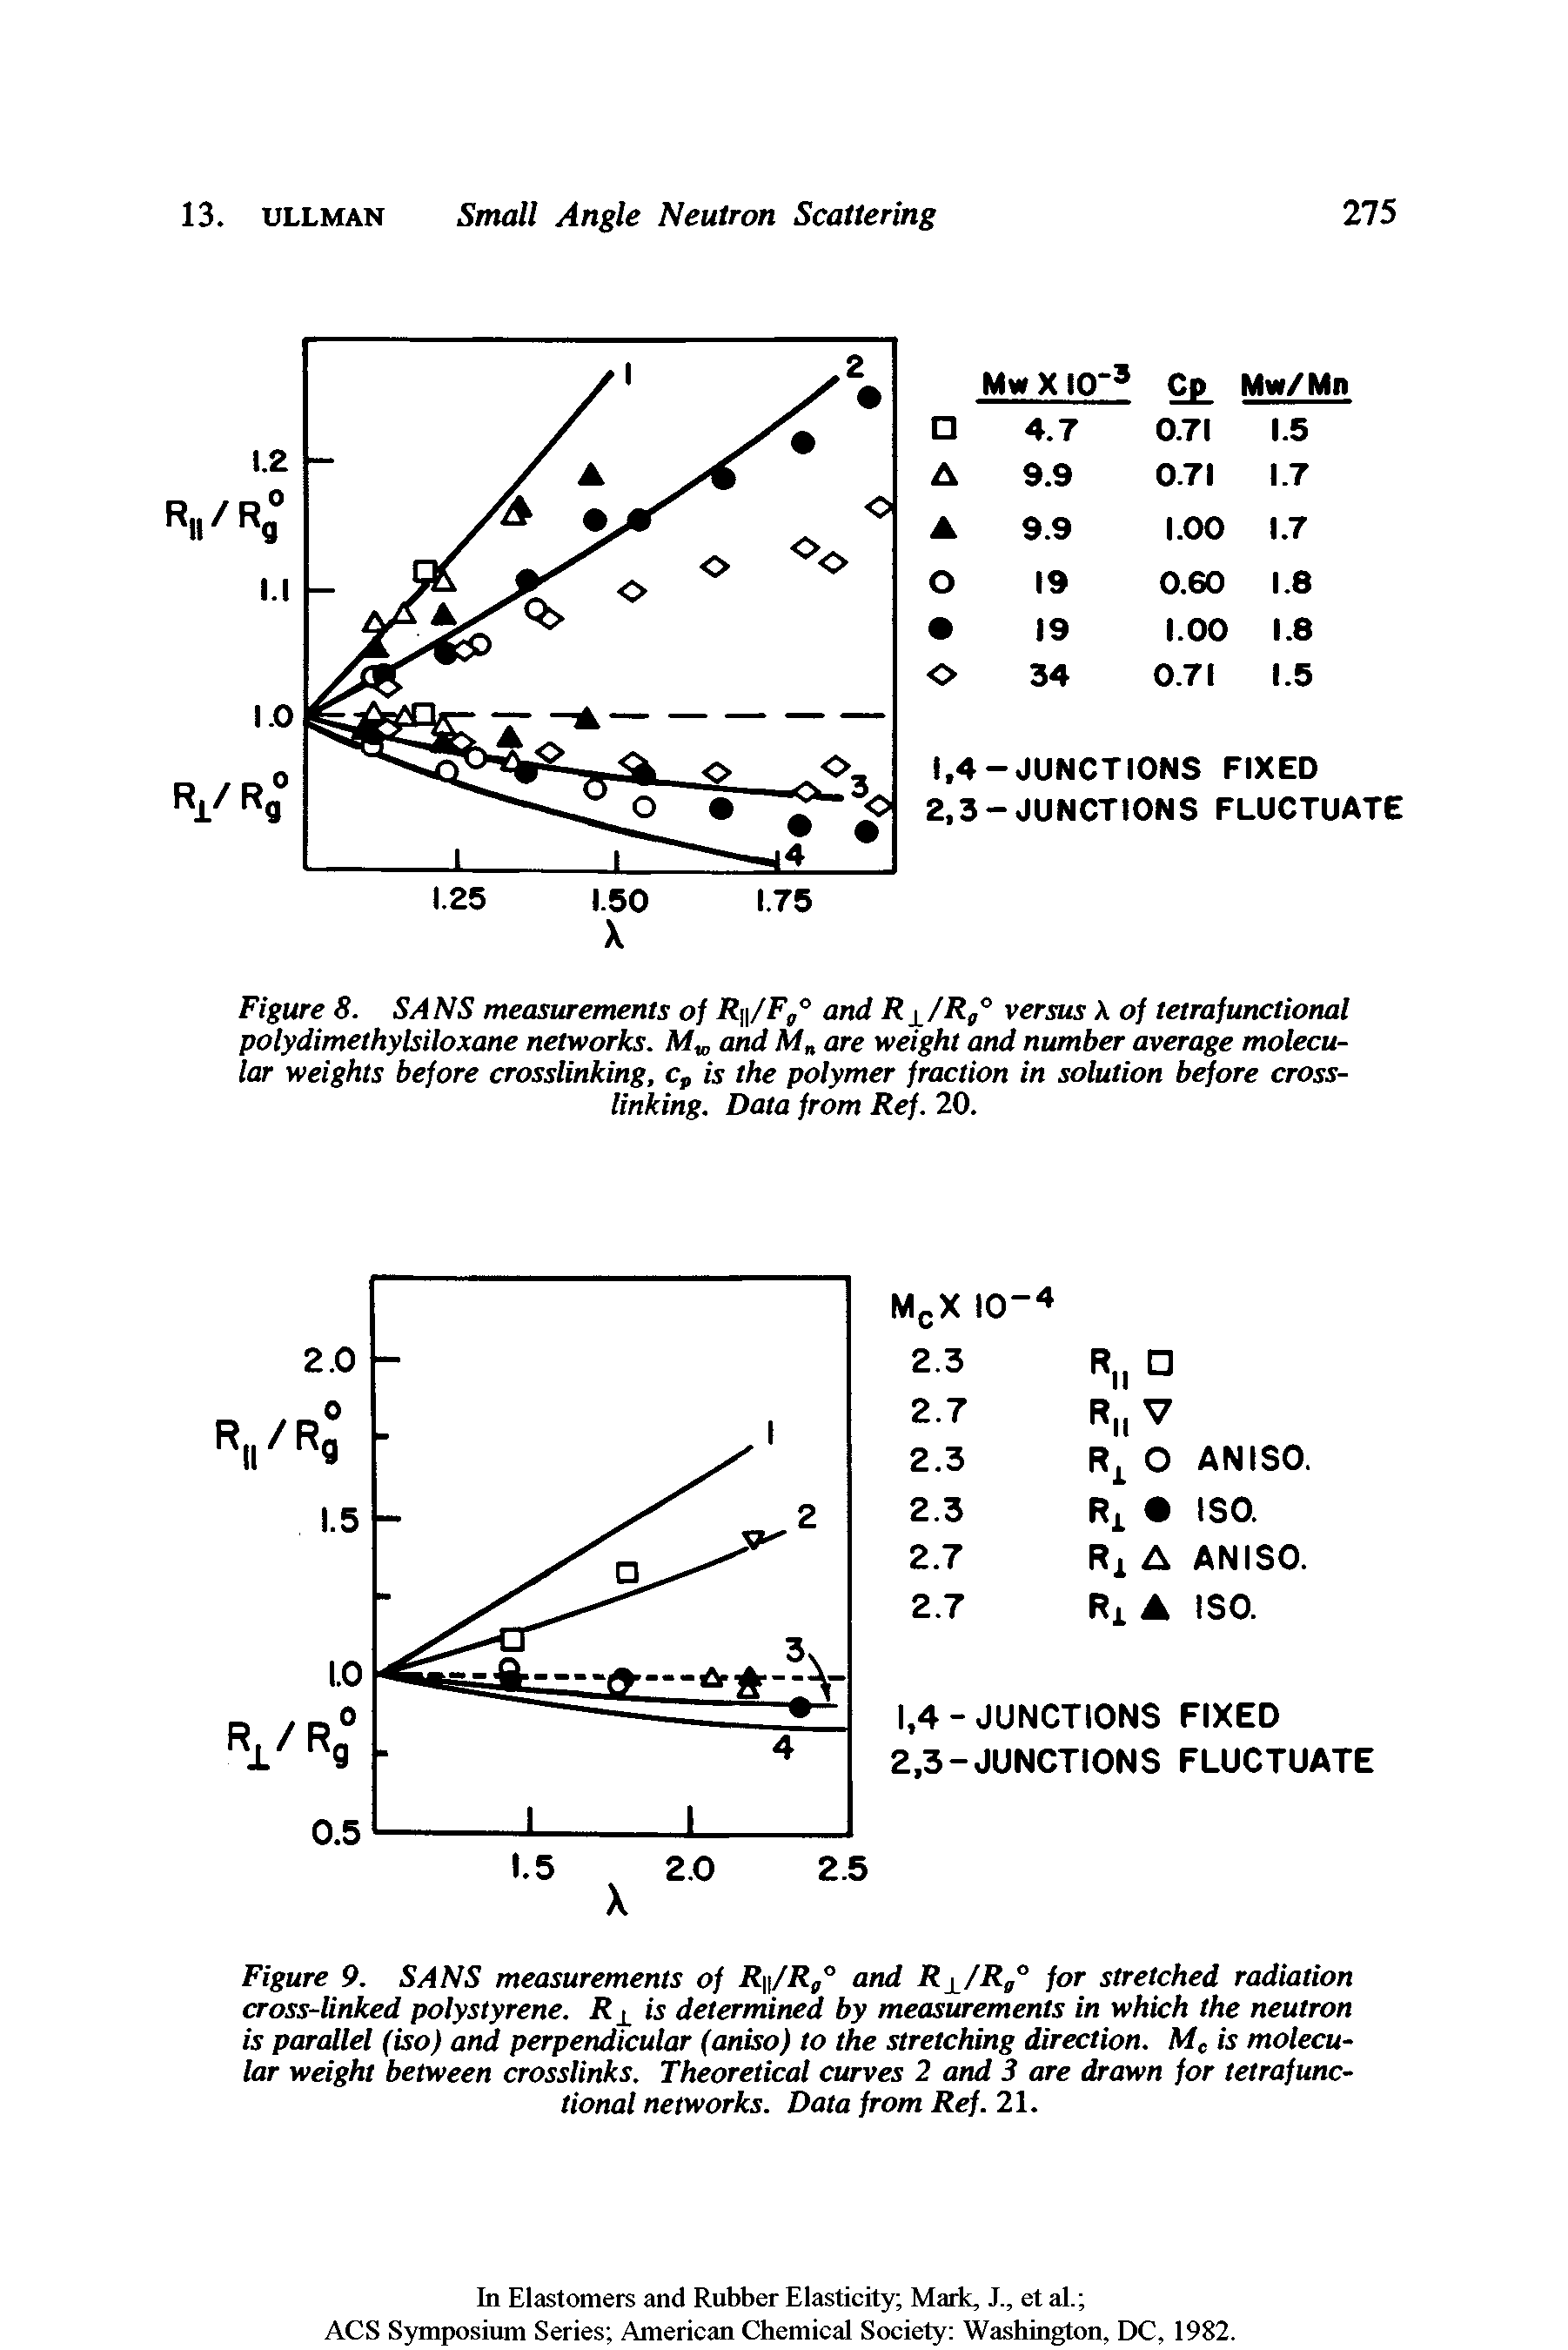 Figure 9. SANS measurements of R /Rt° and RL/R ° for stretched radiation cross-linked polystyrene. is determined by measurements in which the neutron is parallel (iso) and perpendicular (aniso) to the stretching direction. Mc is molecular weight between crosslinks. Theoretical curves 2 and 3 are drawn for tetrafunctional networks. Data from Ref. 21.